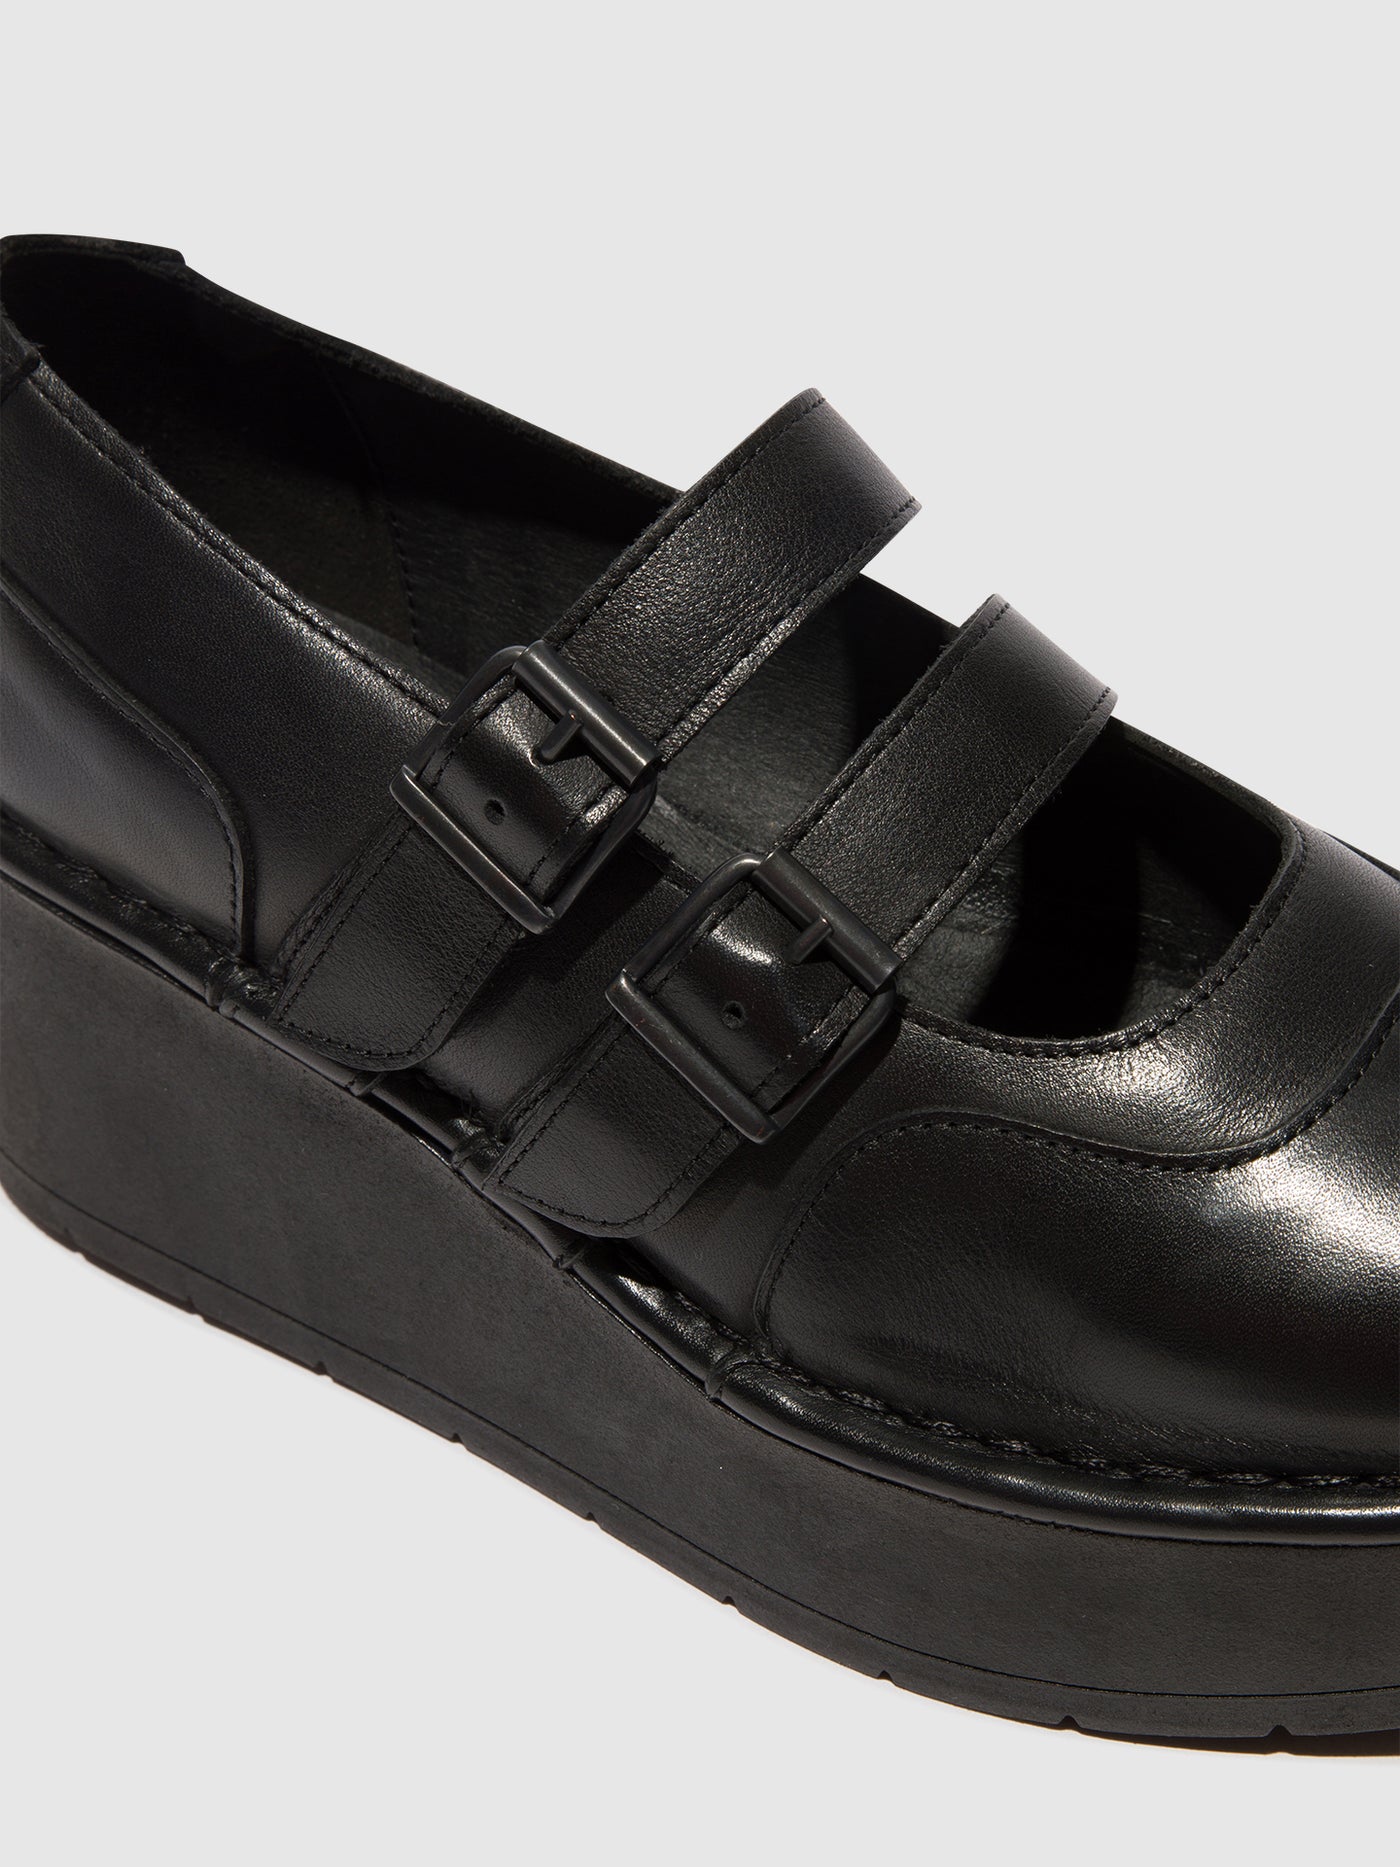 Buckle Shoes HEDI255FLY BLACK